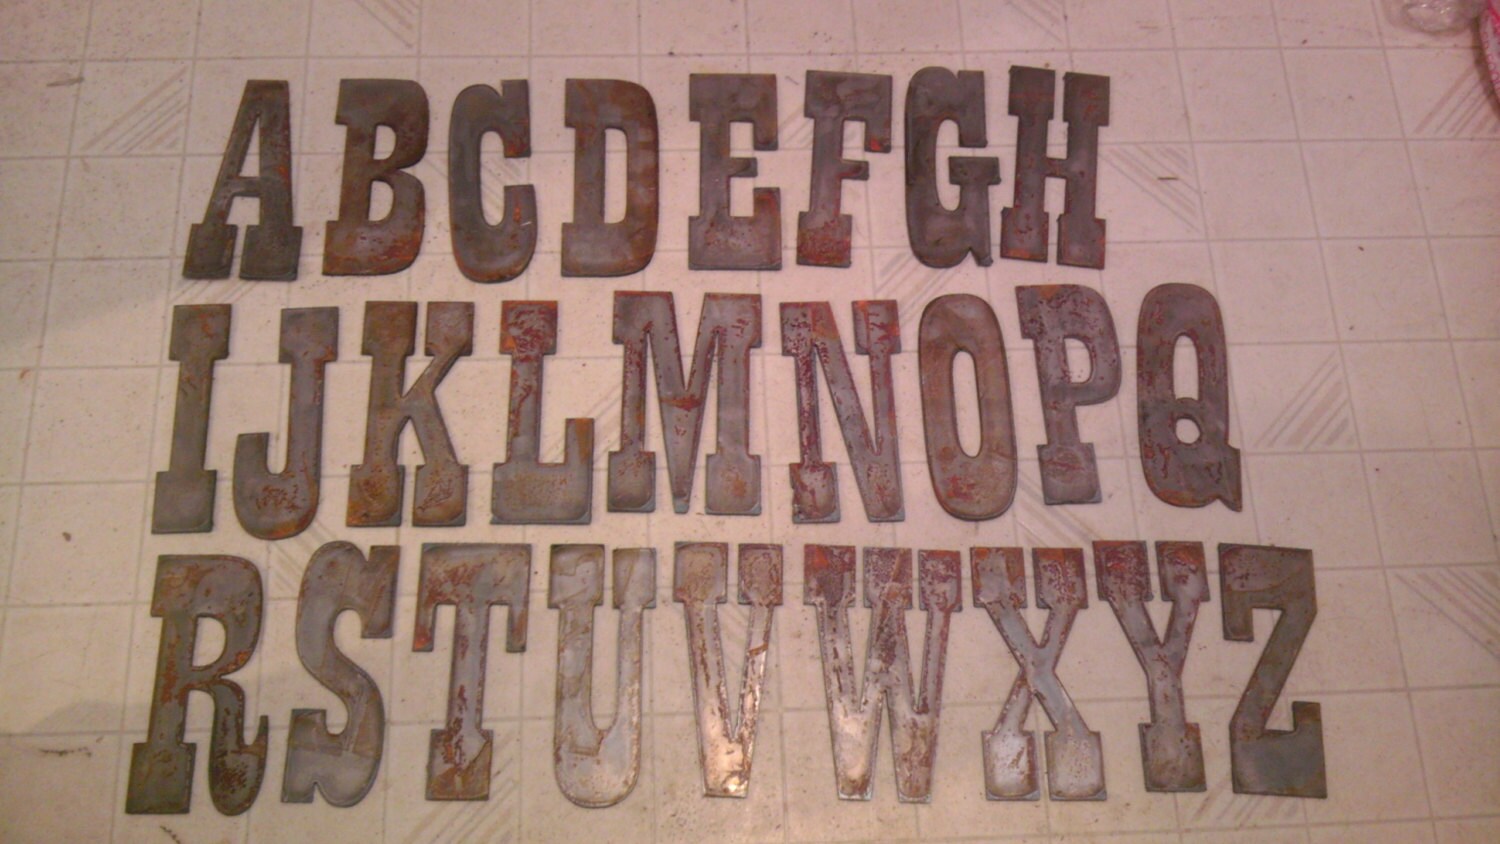 6 Inch Letters Alphabet PER LETTER Rusty Vintage Western Style